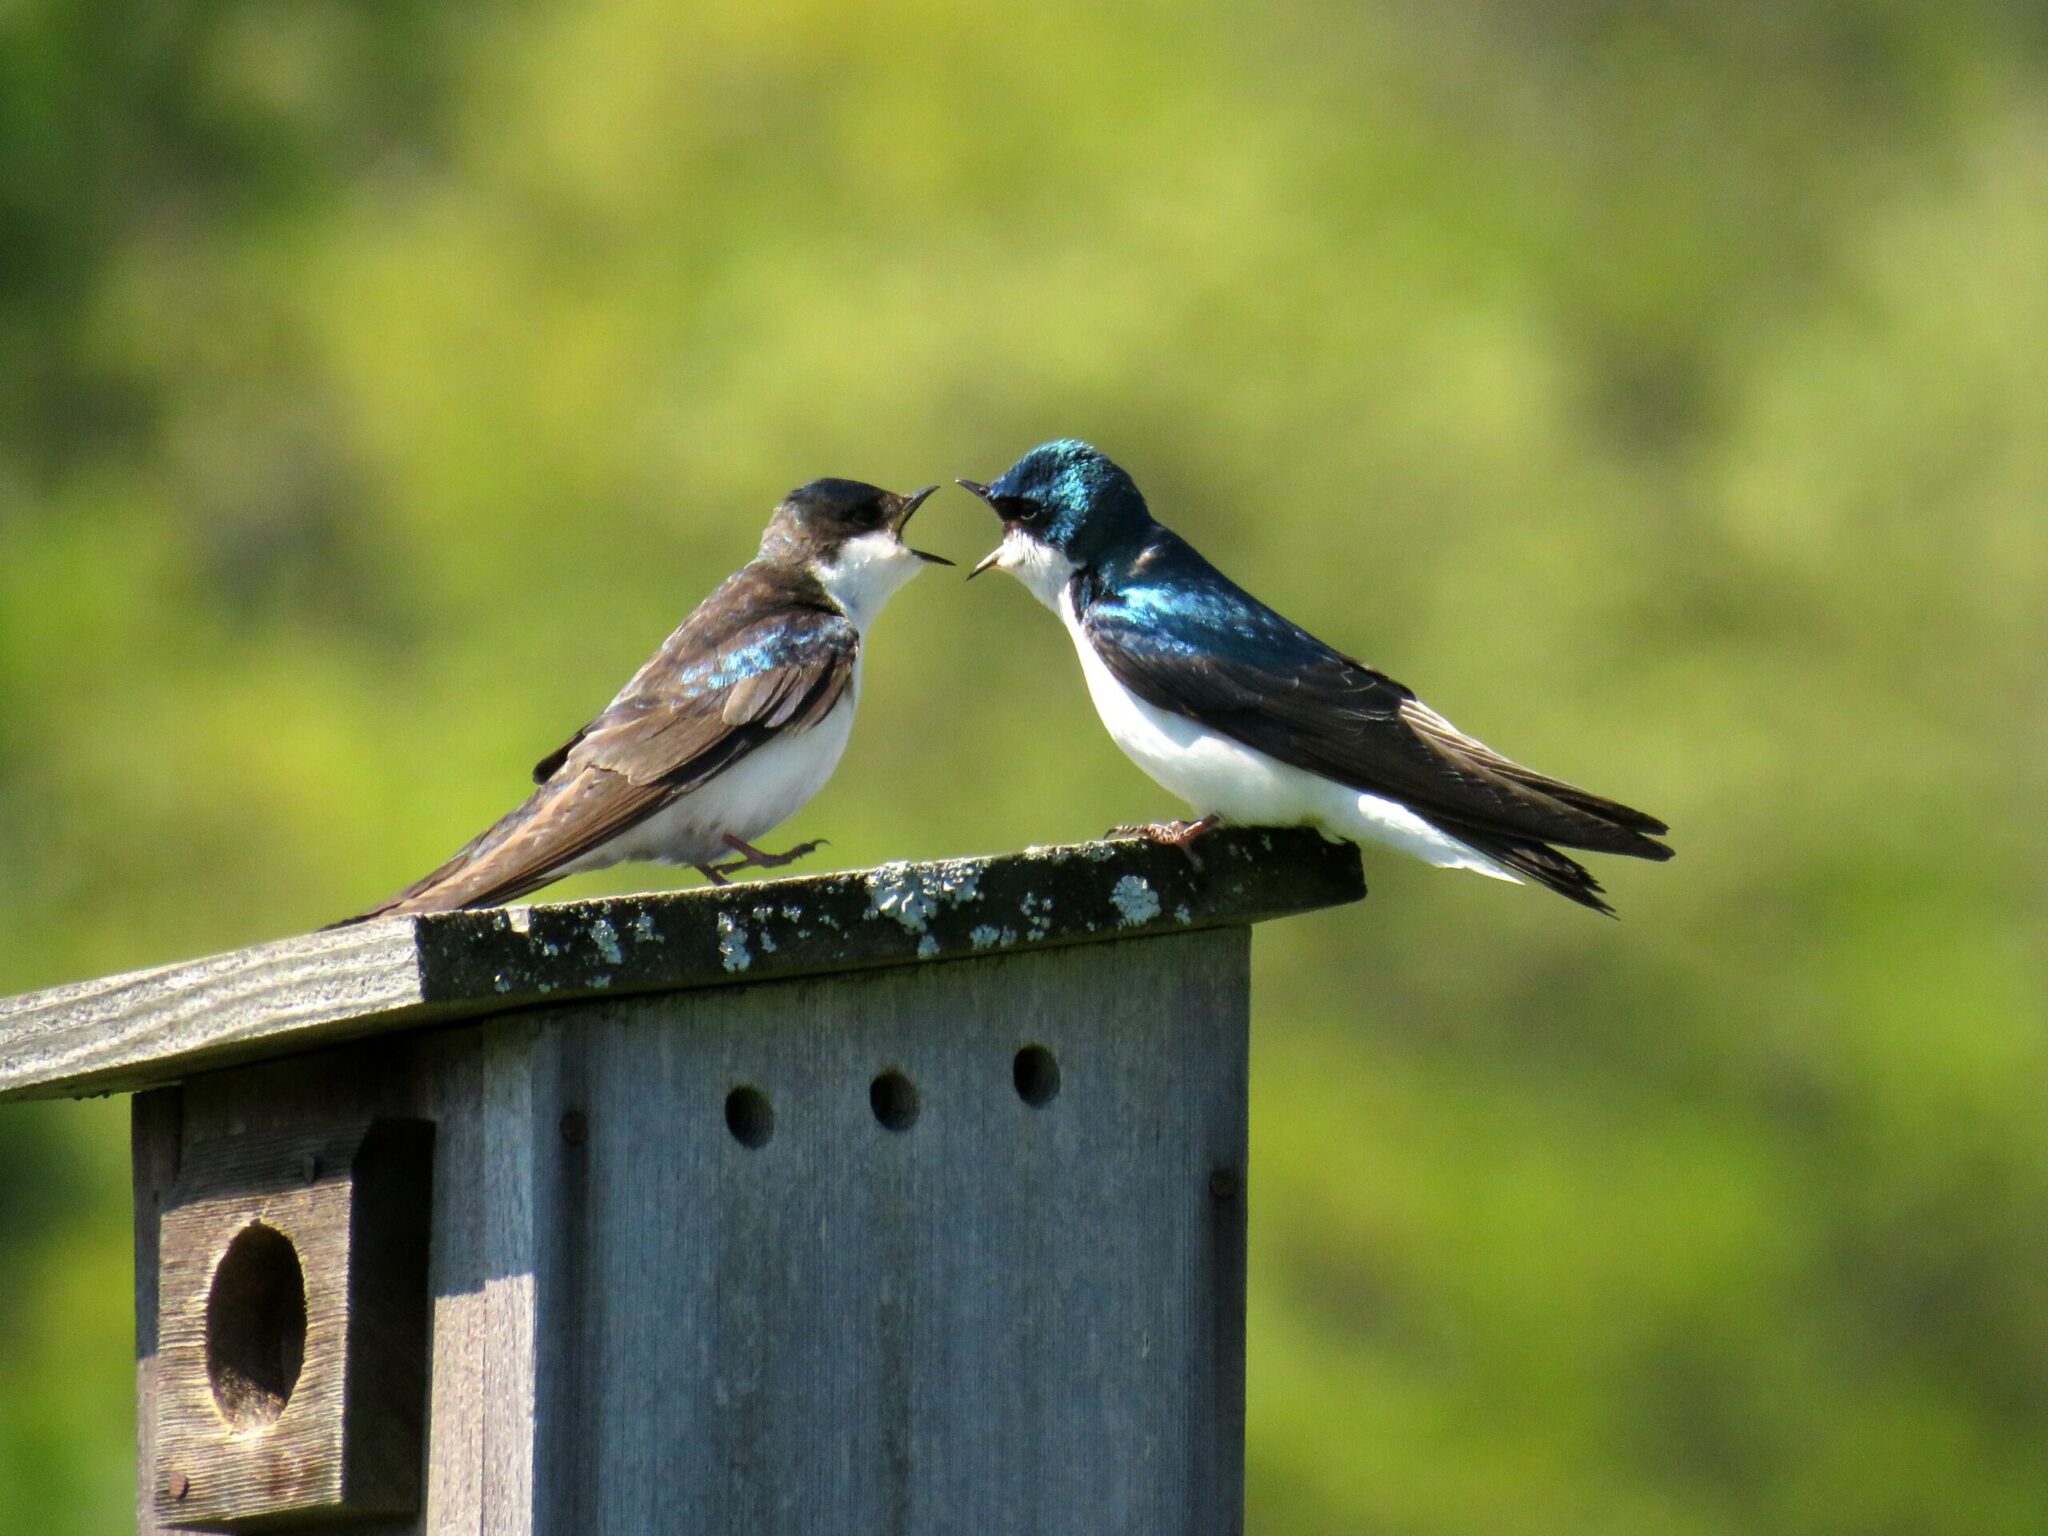 2 birds, one blue, one brown, perched on birdhouse and squawking at each other to represent arguing